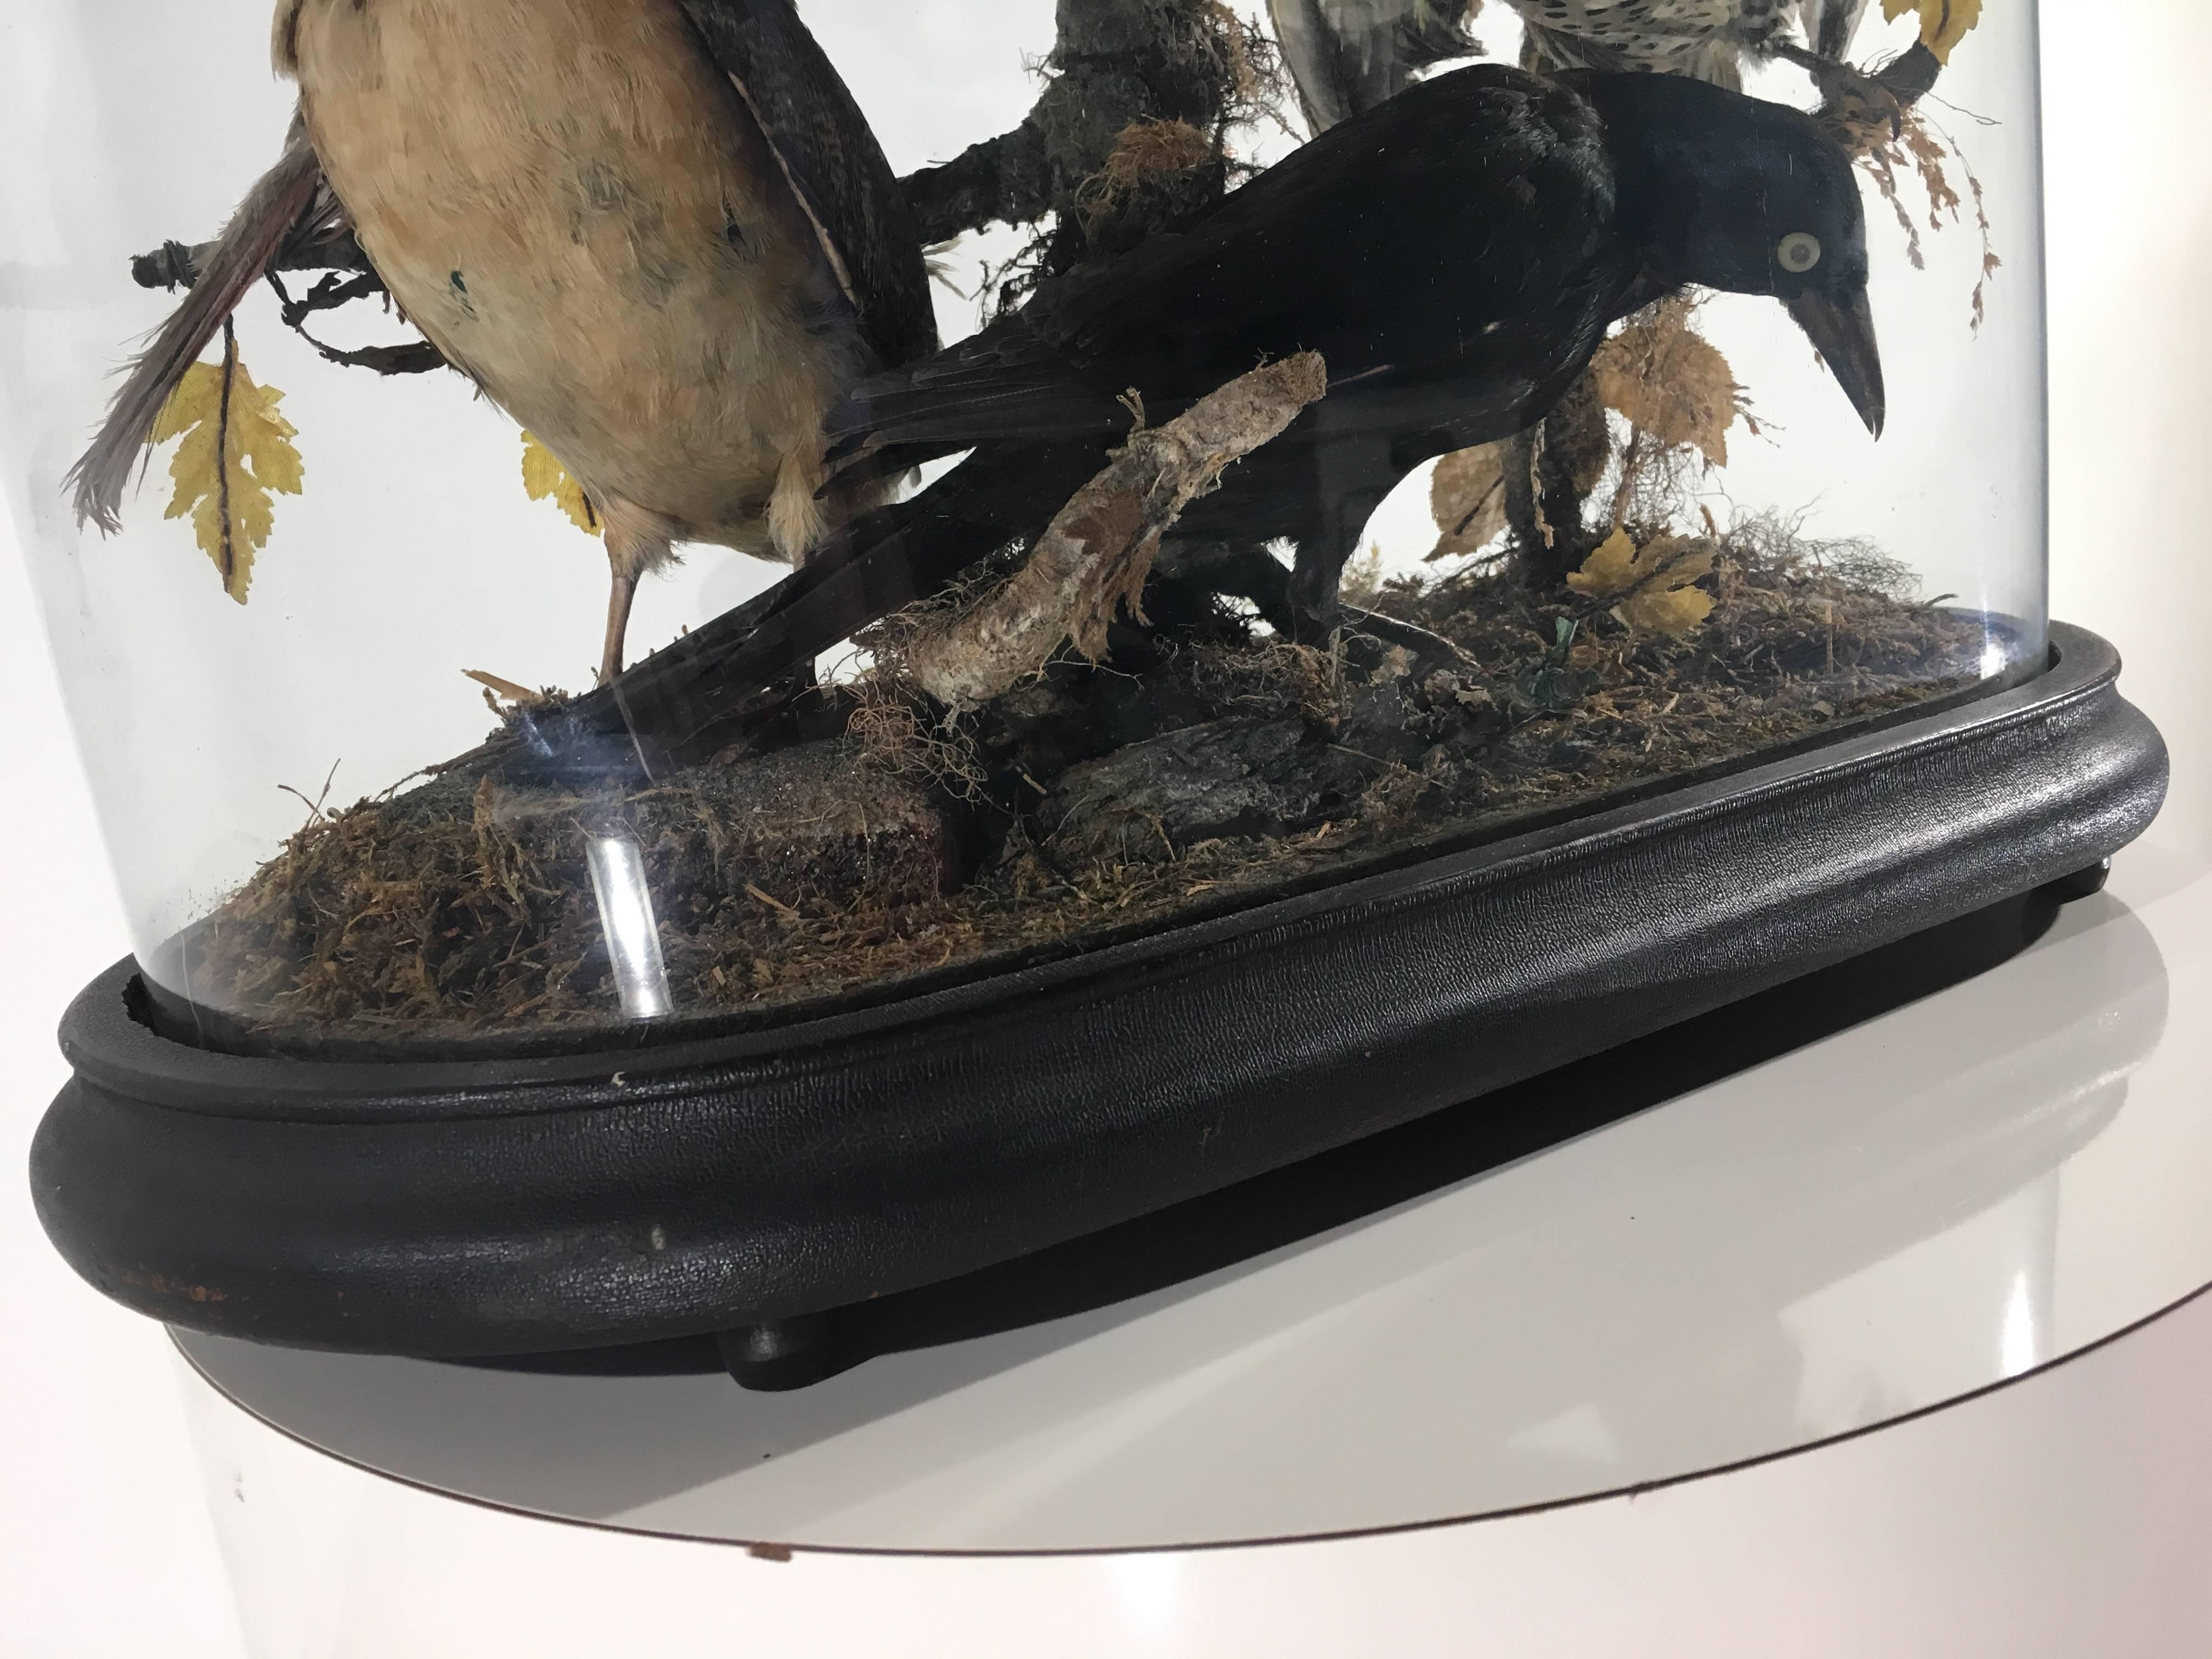 A domed case of taxidermy exotic birds on original ebony base.
Contains nine beautiful birds mounted on branch.